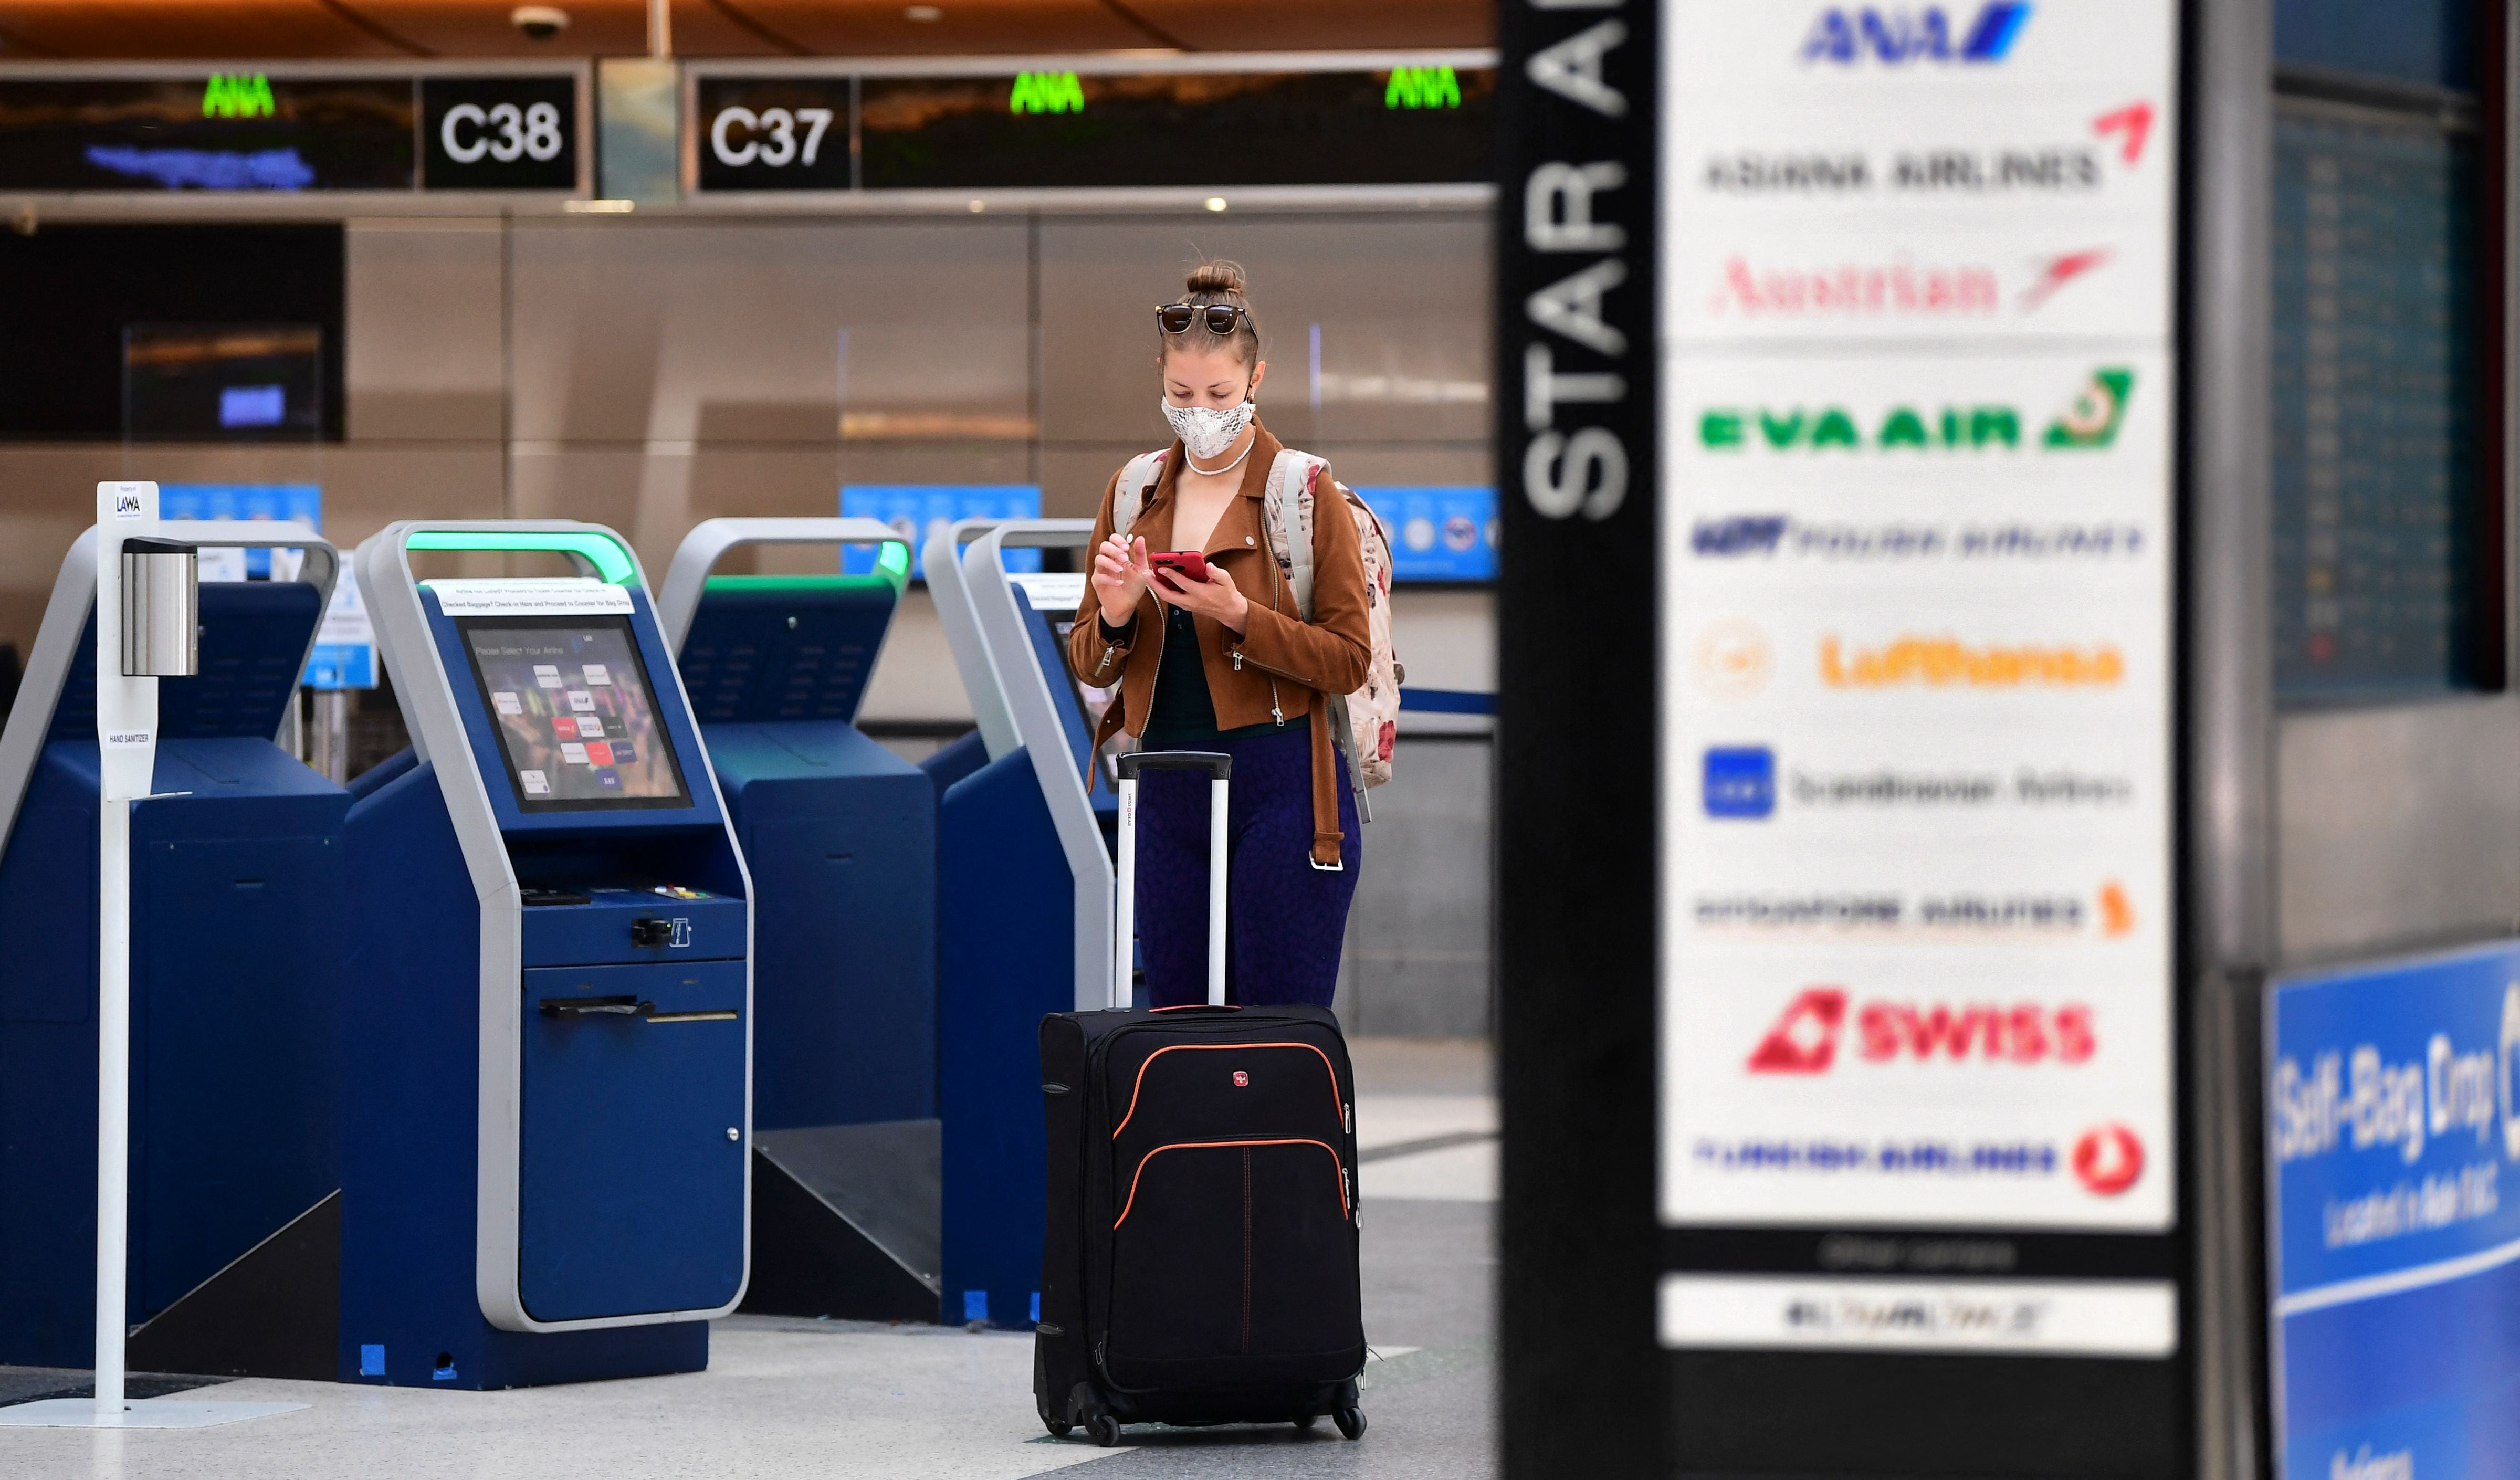 A woman checks her cellphone by self check-in kiosks on the departures level of Los Angeles International Airport (LAX) on May 27, 2021 in Los Angeles.